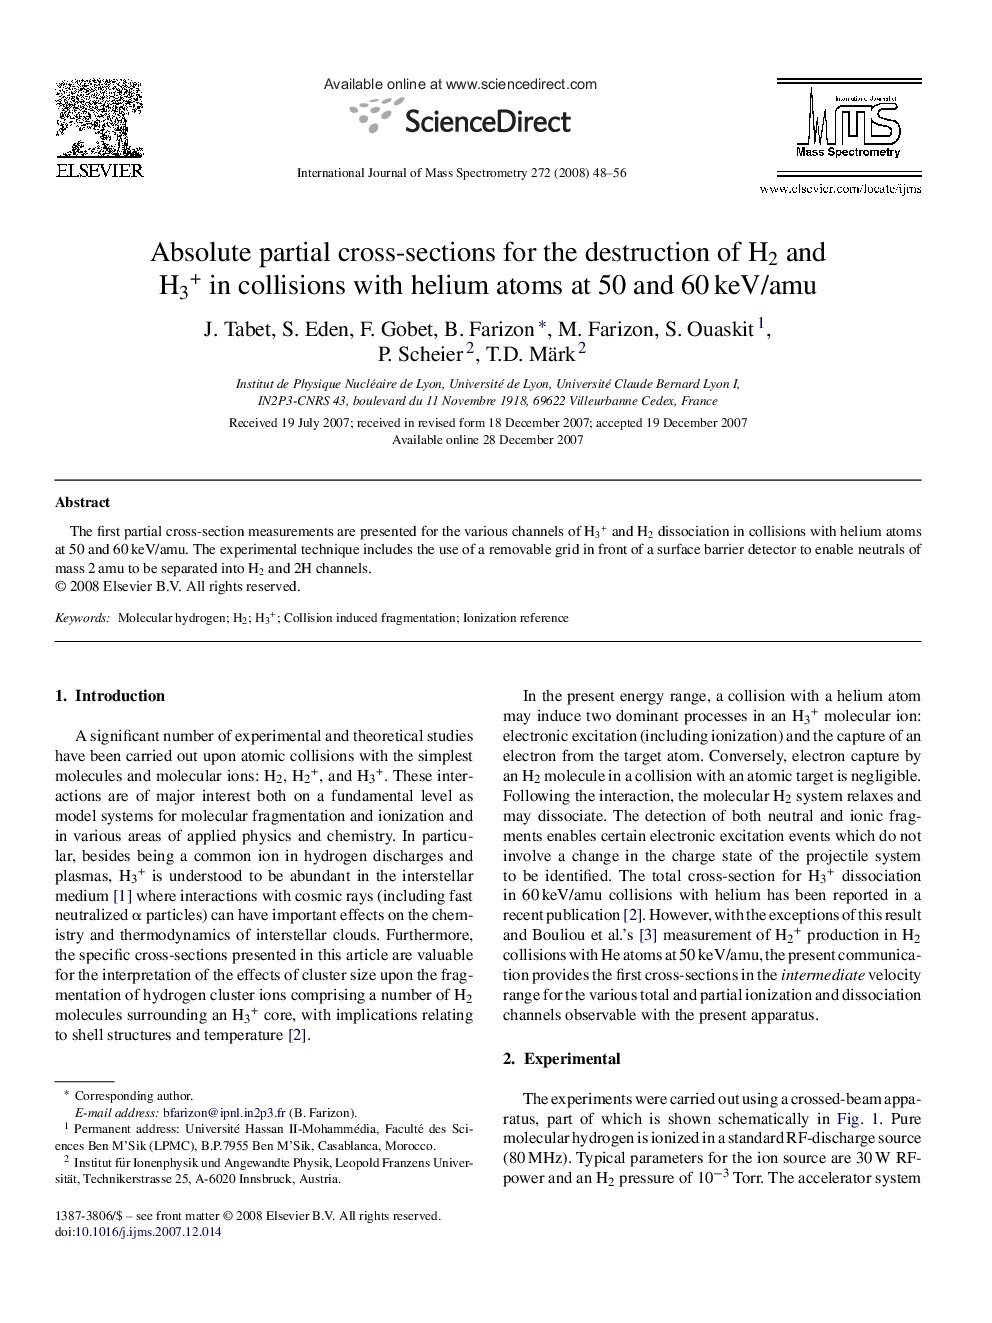 Absolute partial cross-sections for the destruction of H2 and H3+ in collisions with helium atoms at 50 and 60Â keV/amu